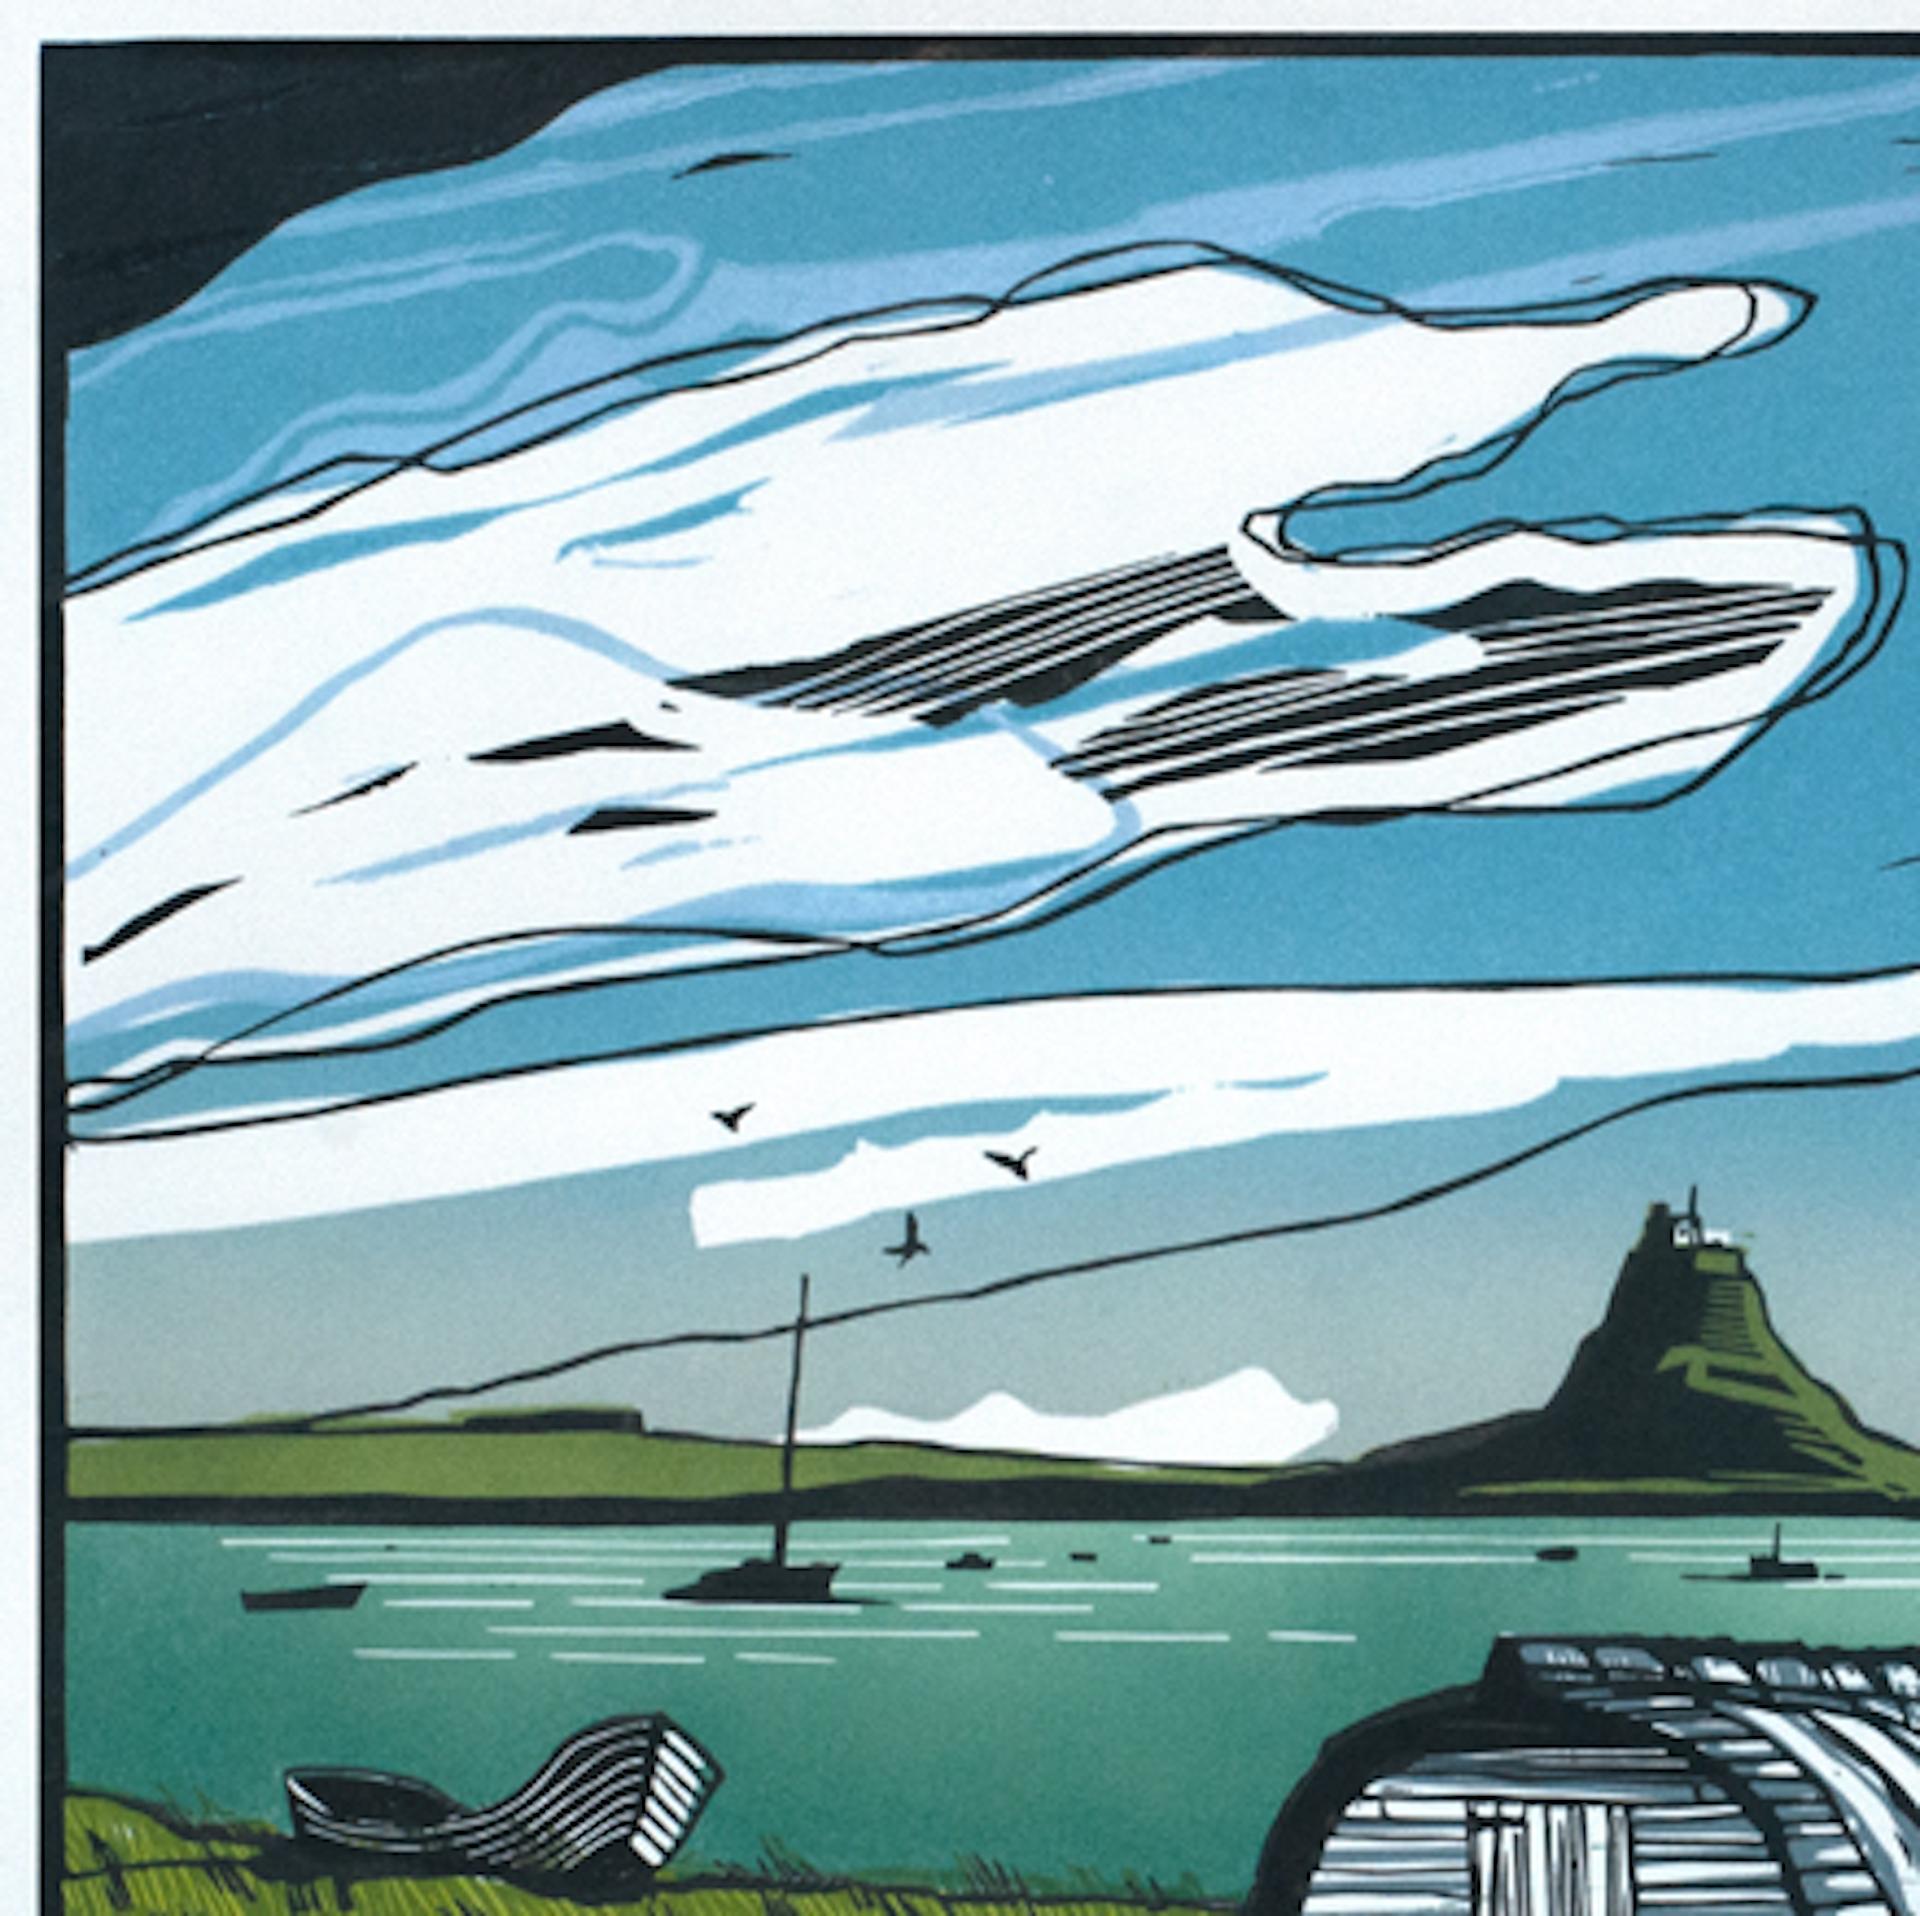 Colin Moore
Lindisfarne
Limited Edition Linocut Print
Edition of 100
Image Size: H 42cm  x  W 59.5cm
Sheet Size: H 51cm x W 67 cm x D 0.1cm
Sold Unframed
Please note that insitu images are purely an indication of how a piece may look.

Lindisfarne